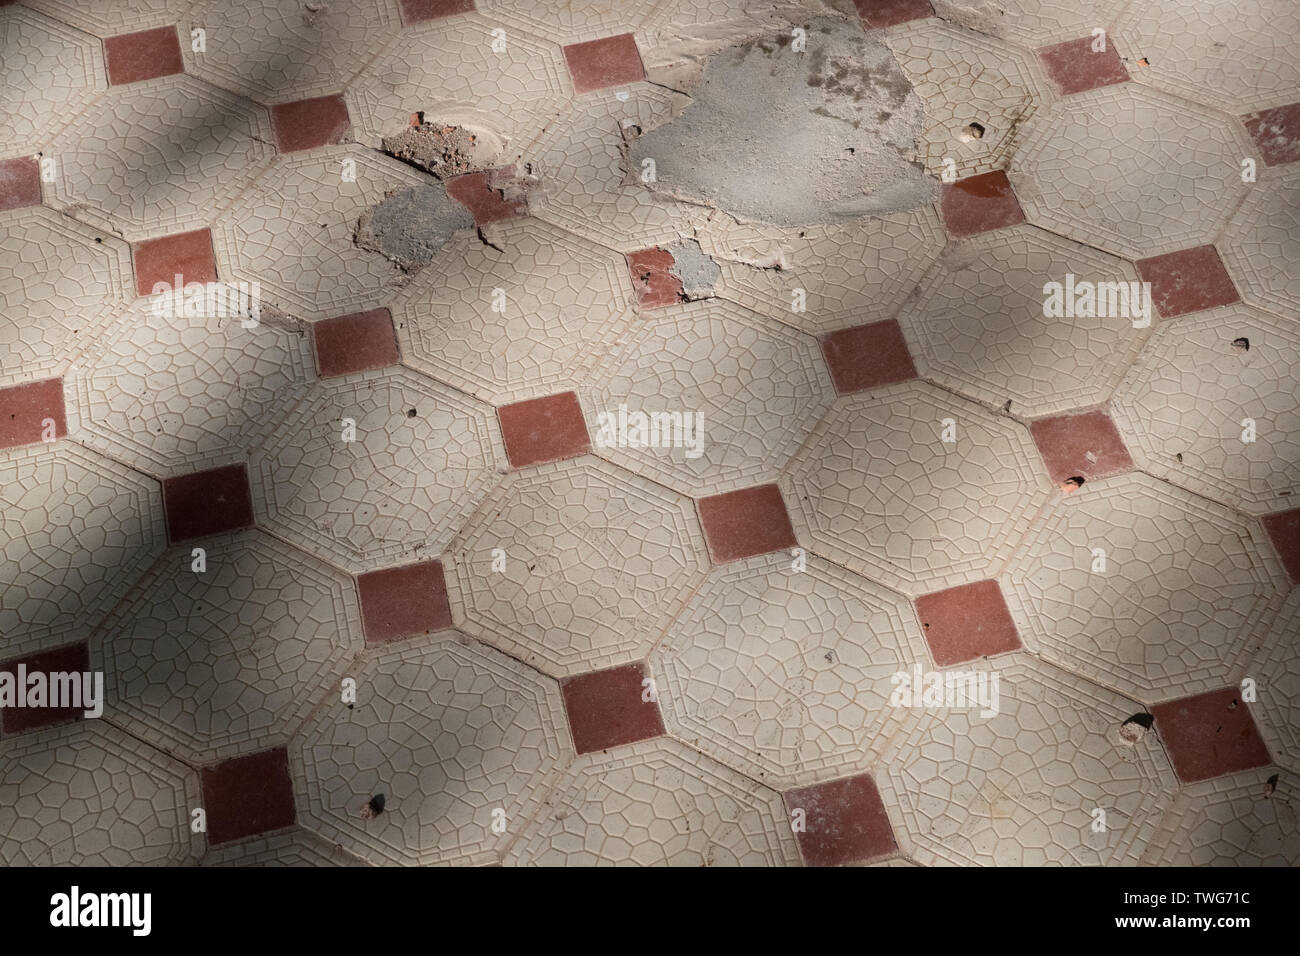 dirty and broken floor made of tile Stock Photo